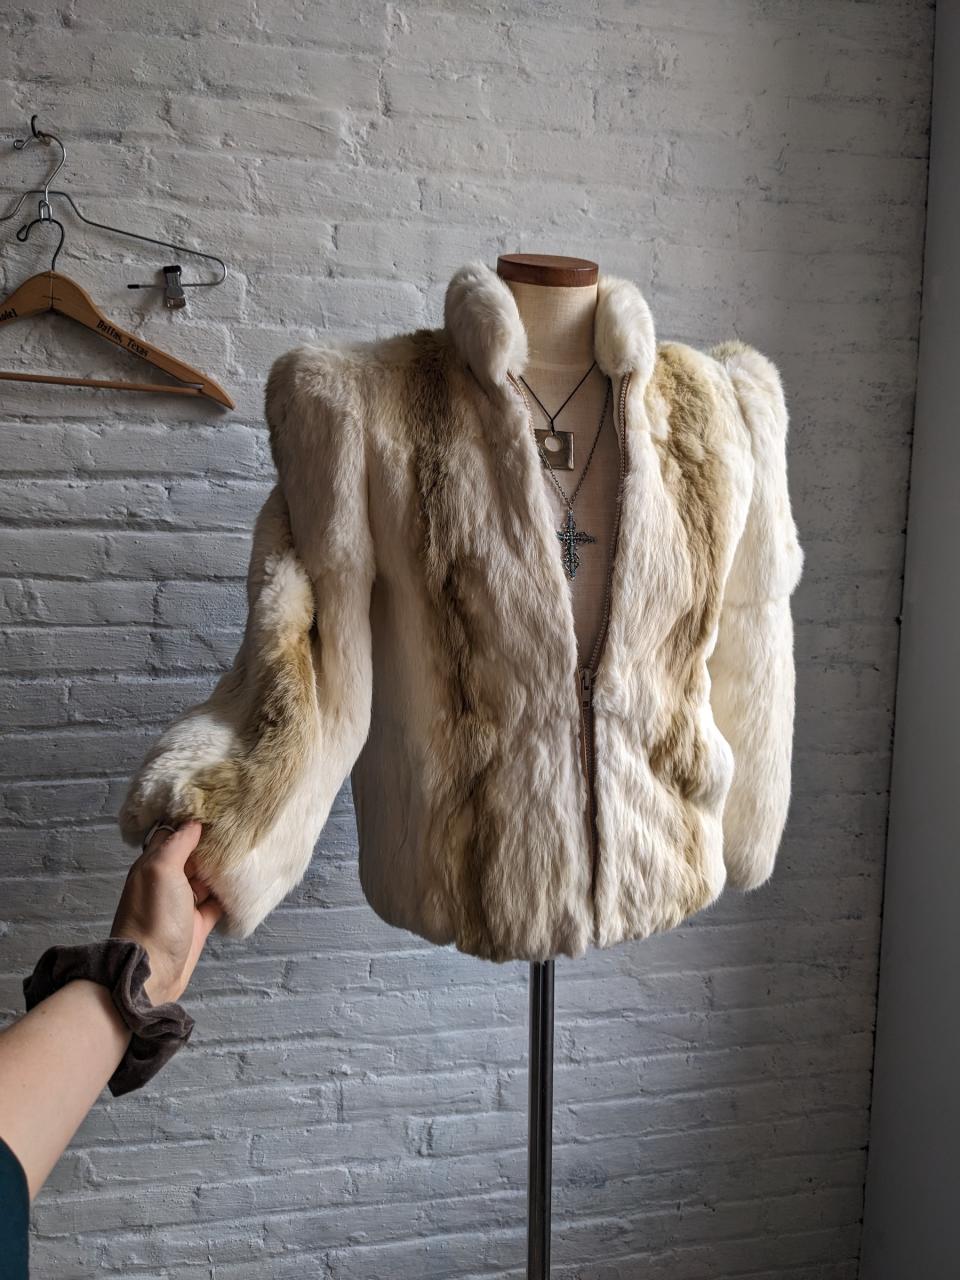 Poshmark seller @shoplaterdudes claims this vintage jacket is genuine fox fur, however, no tags indicate the type of material. It is listed for $1,399.